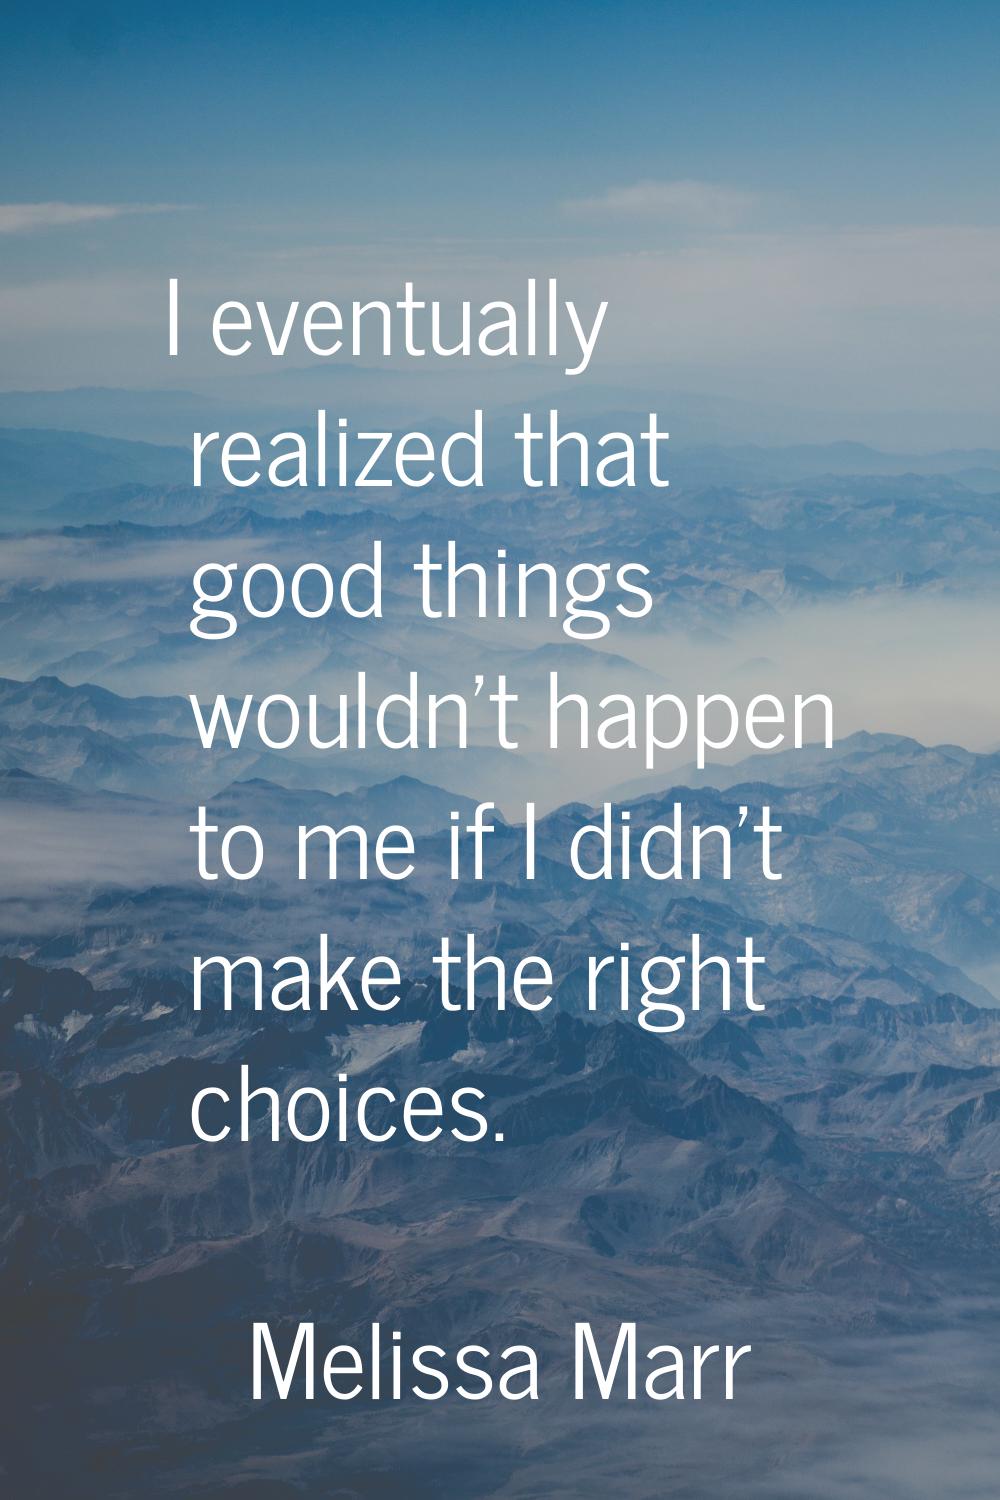 I eventually realized that good things wouldn't happen to me if I didn't make the right choices.